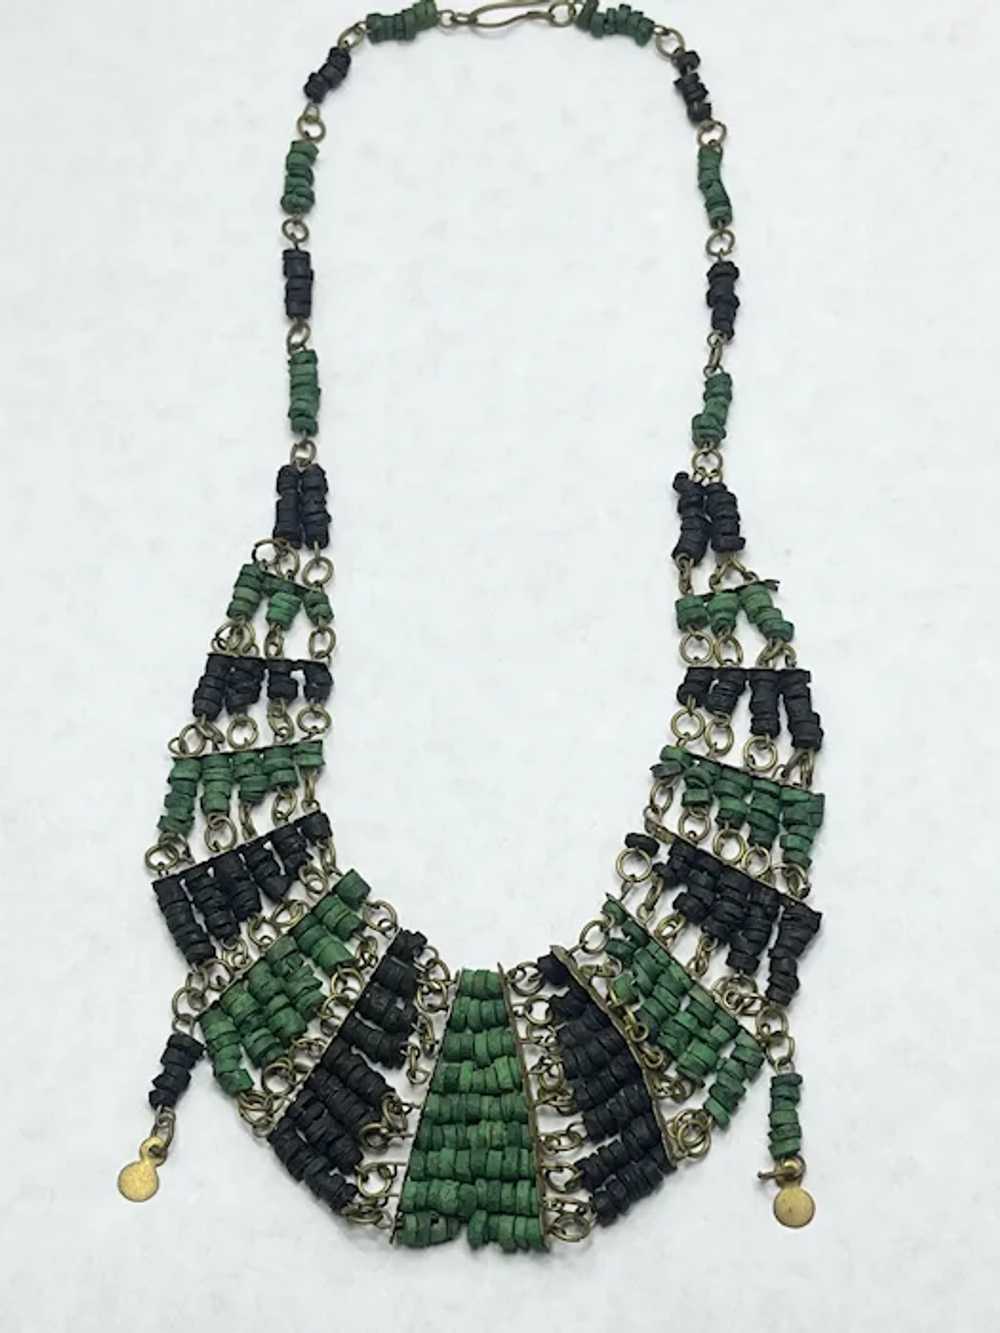 Vintage Egyptian Revival Faience Beaded Necklace - image 5